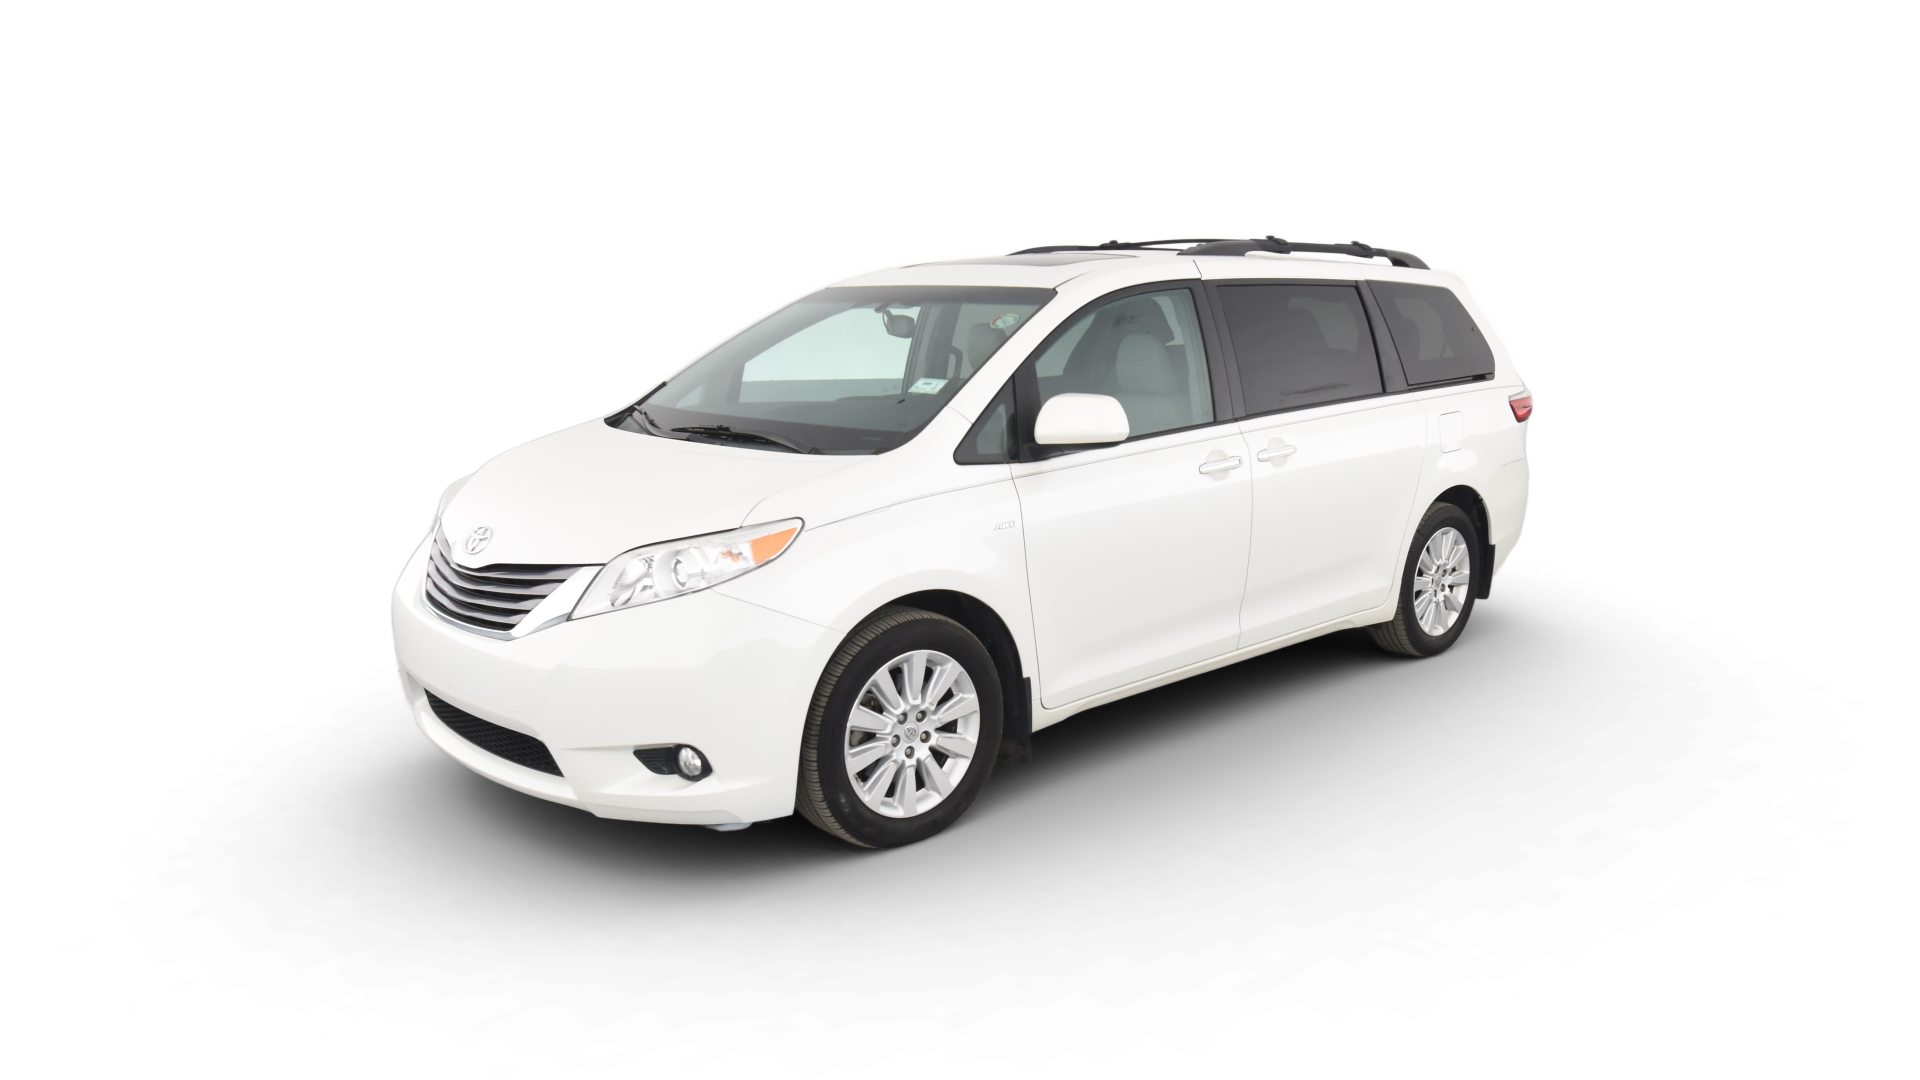 Zweet zout Geld rubber Used Toyota Sienna For Sale Online | Carvana